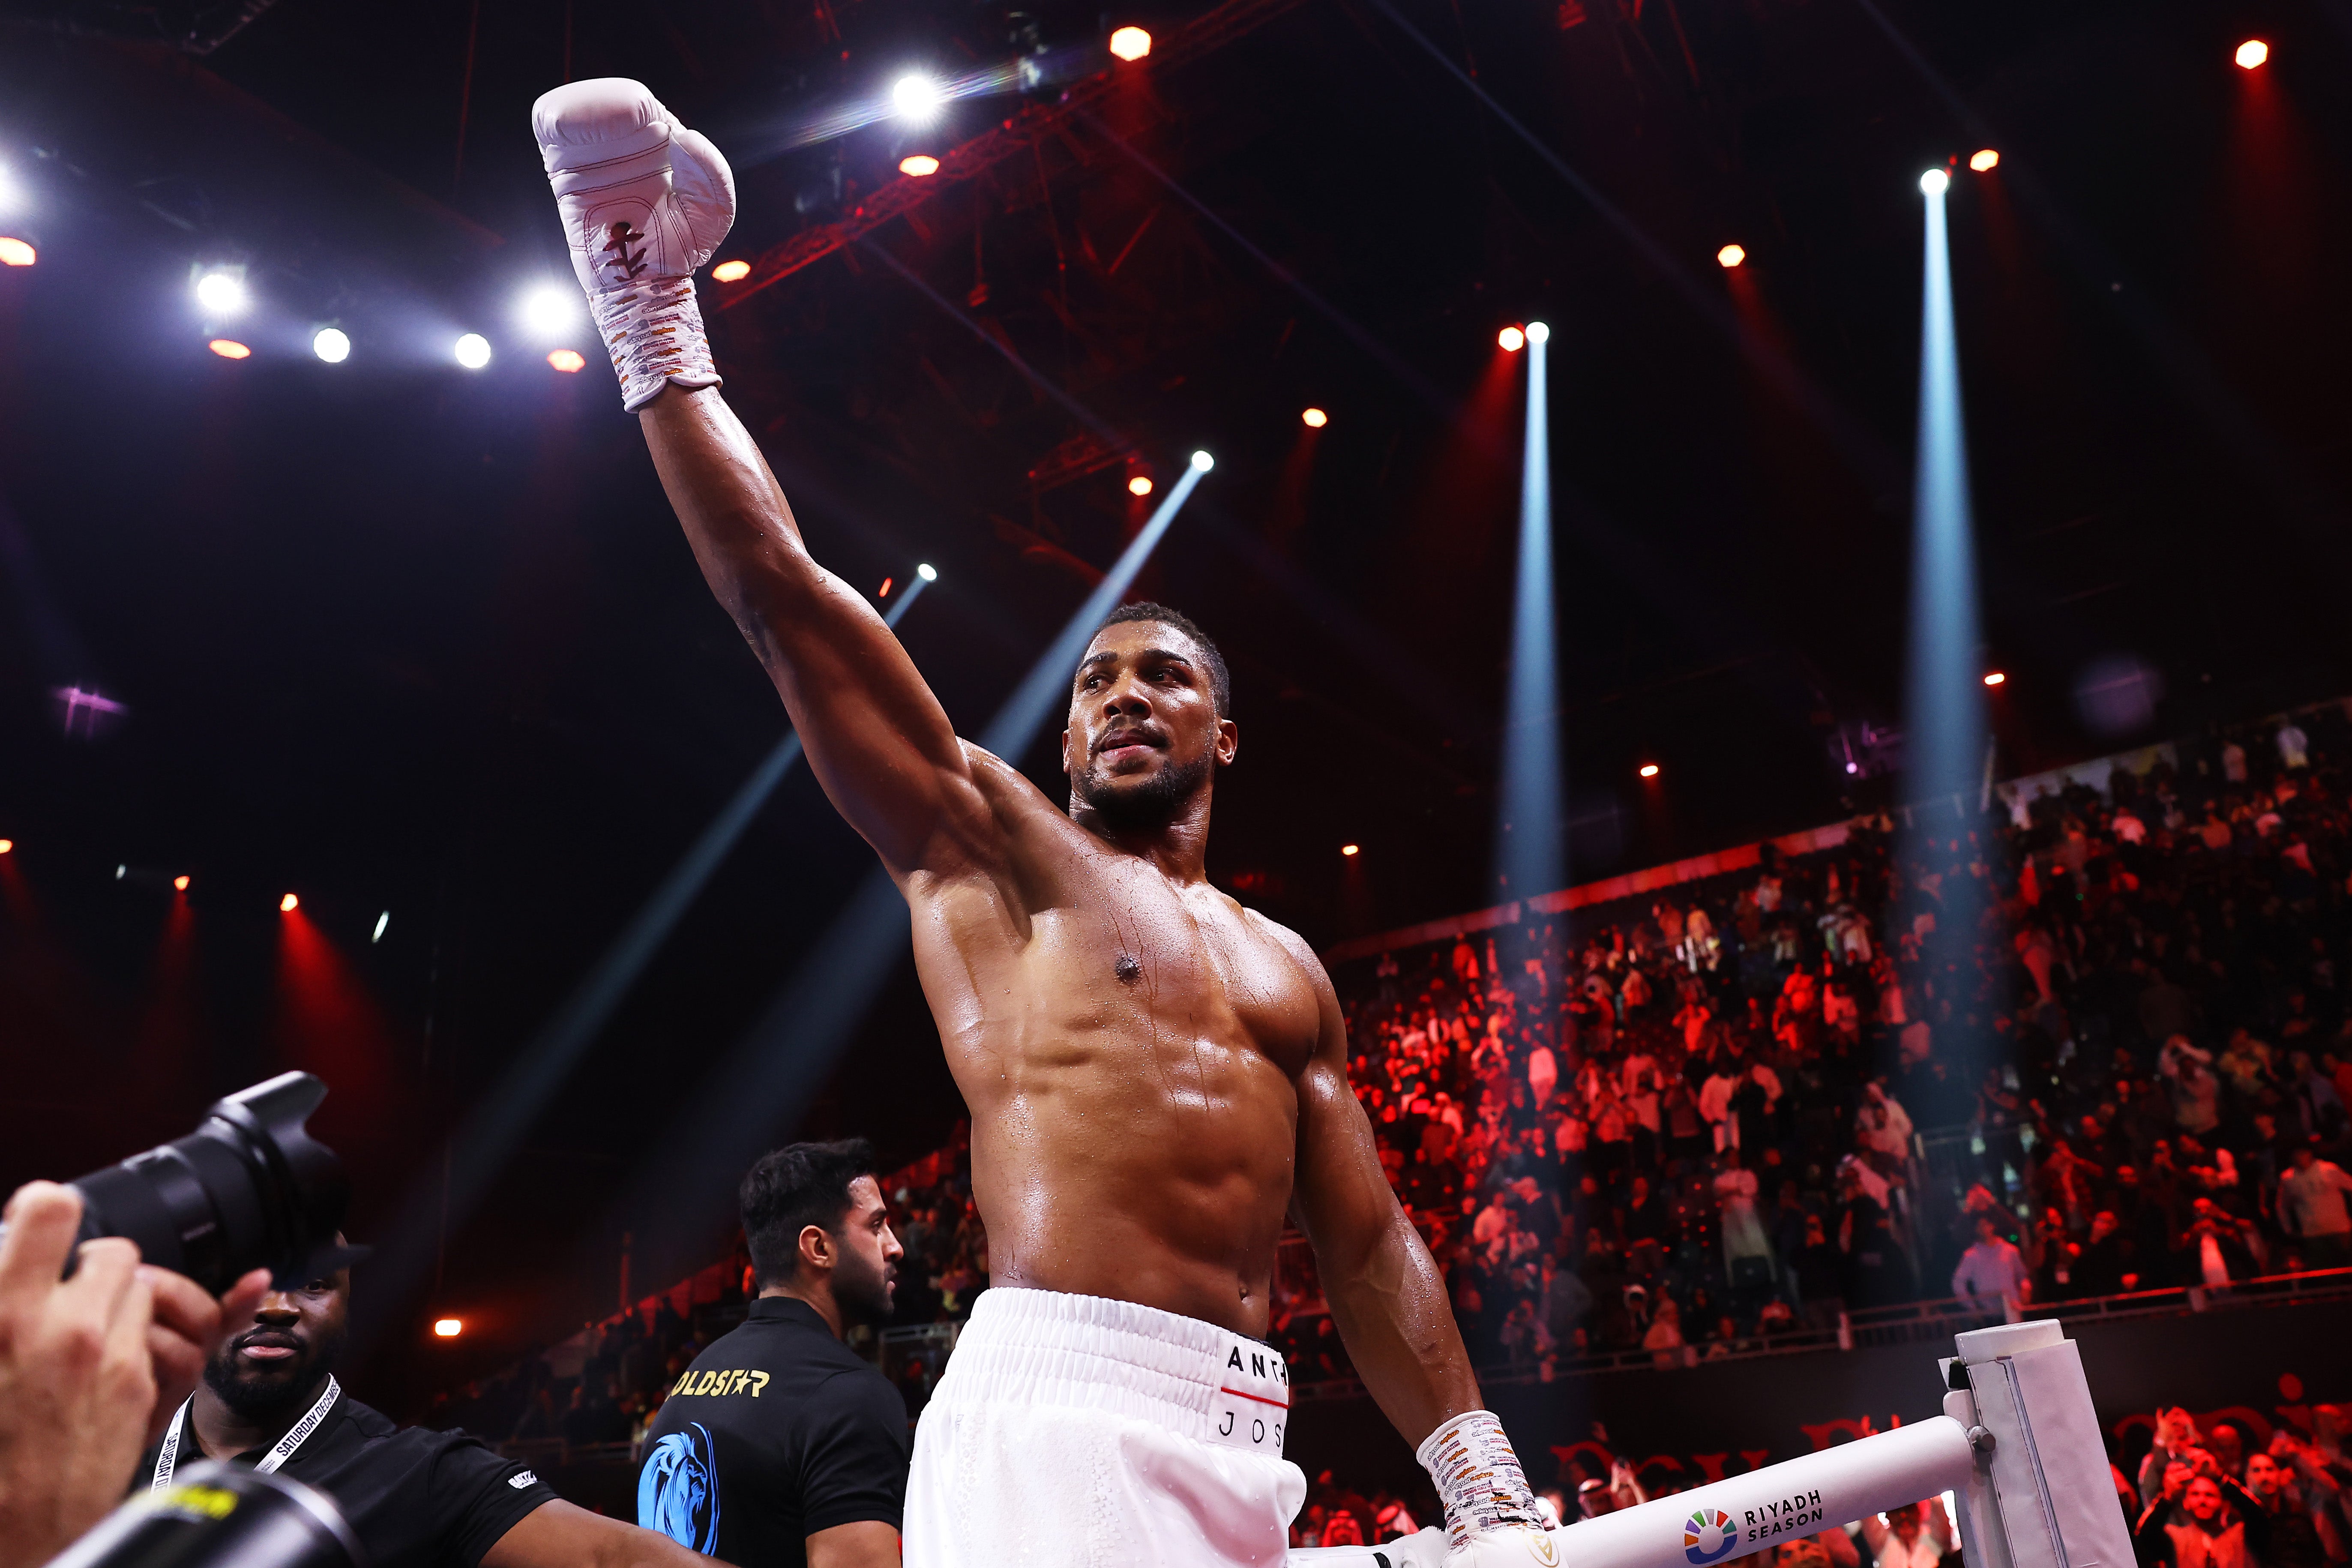 Joshua reasserted his status as a problem in the heavyweight division